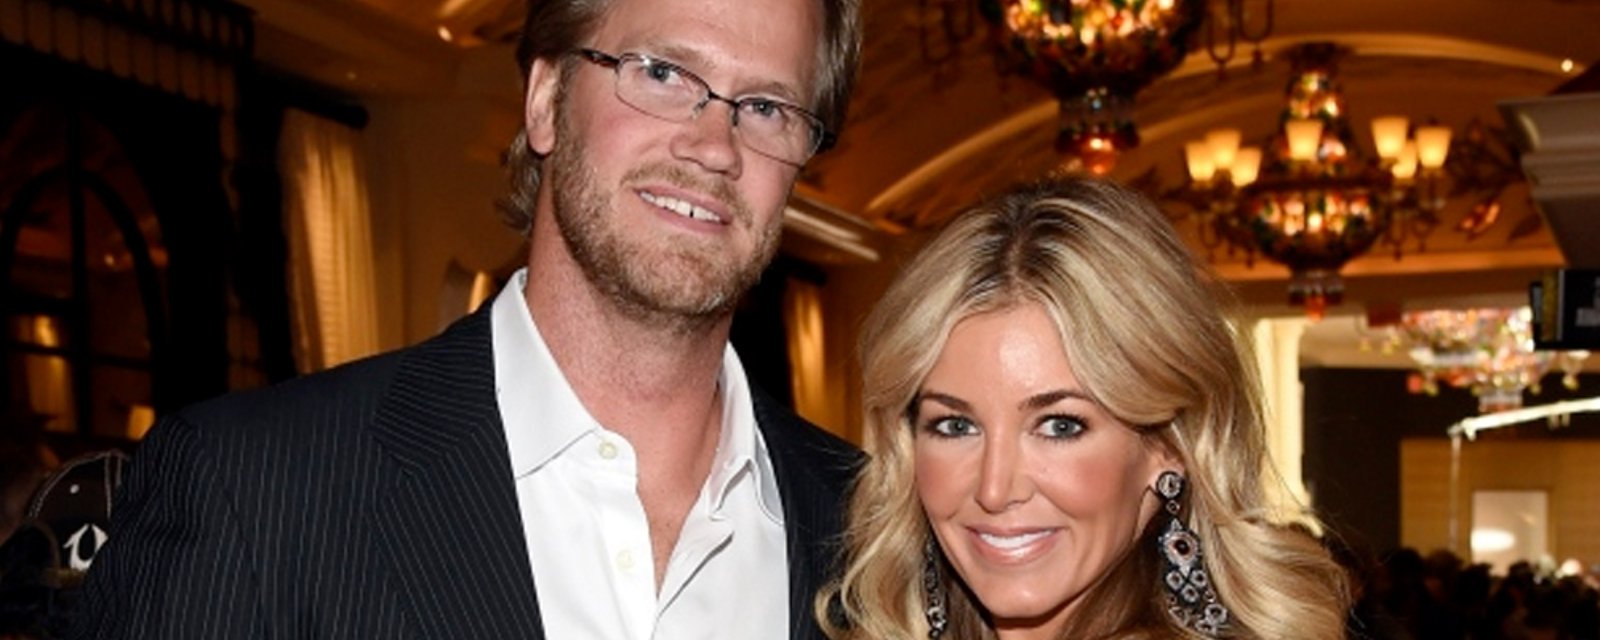 Pronger leaves Panthers organization, fans point to his wife as a problem yet again